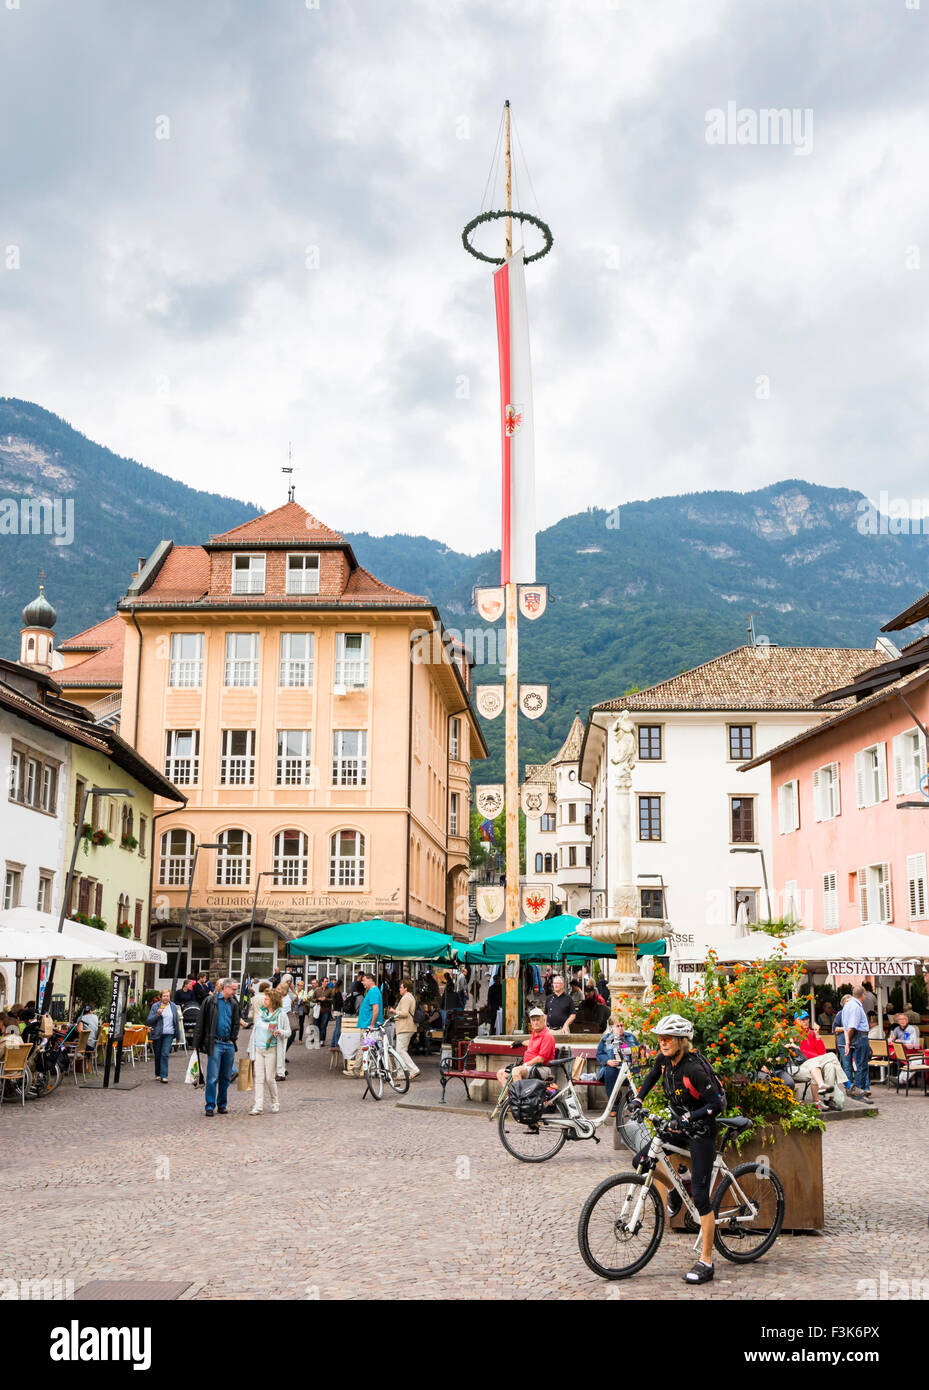 KALTERN, ITALY - SEPTEMBER 22: People at the market square of Kaltern, Italy on September 22, 2015. Stock Photo